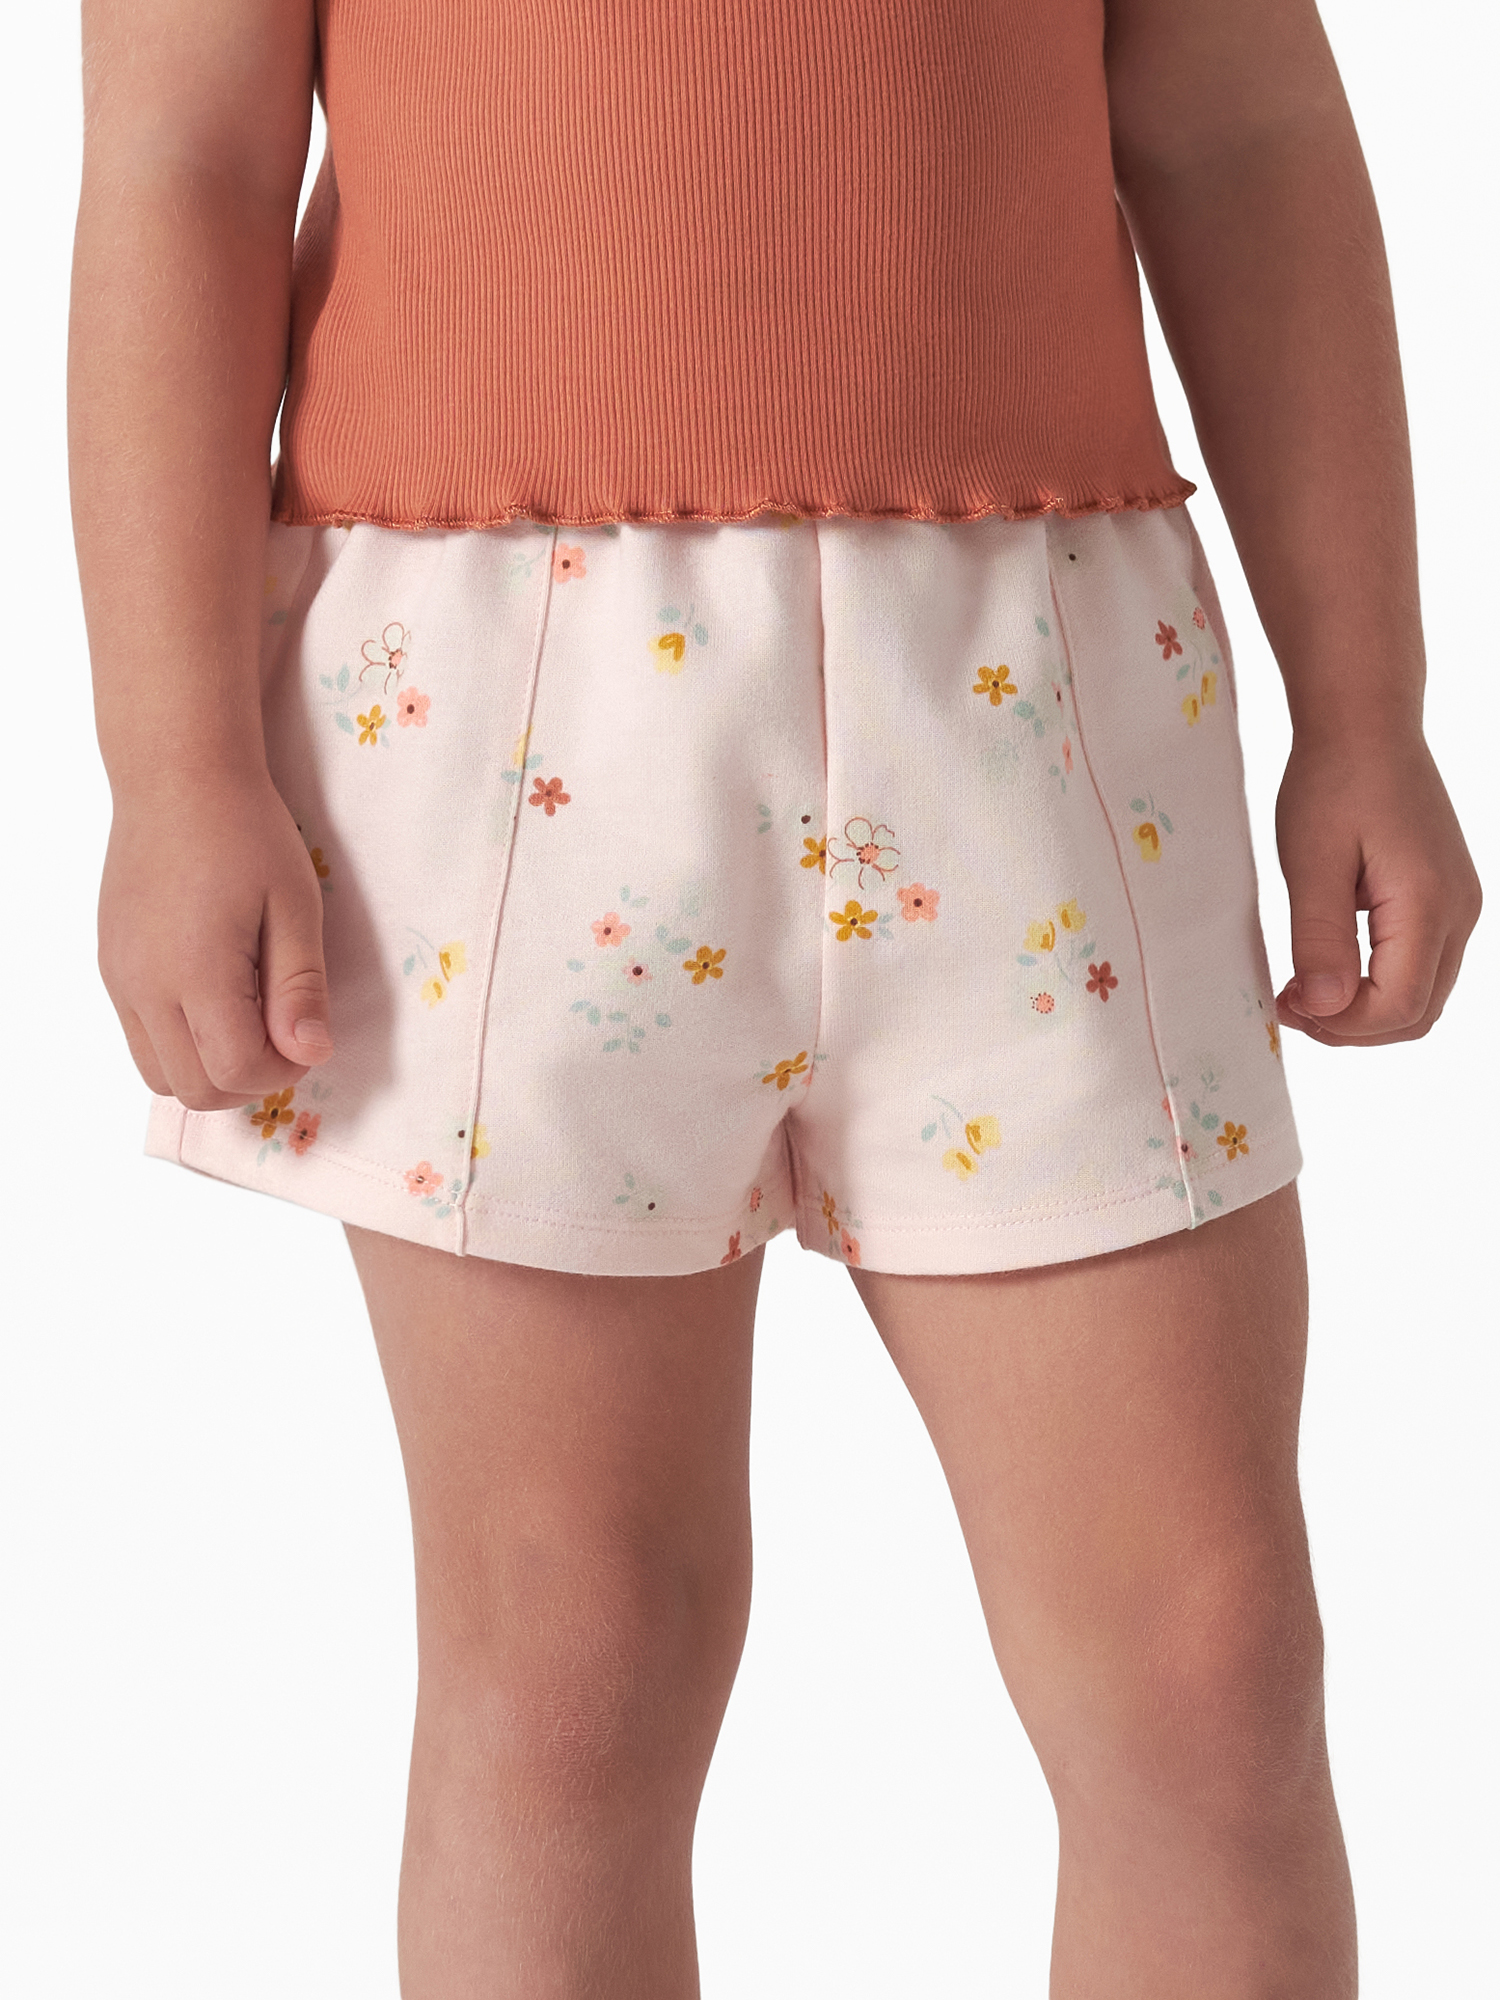 Modern Moments by Gerber Toddler Girl Peached French Terry Shorts, 2-Pack, Sizes 12M-5T - image 3 of 11